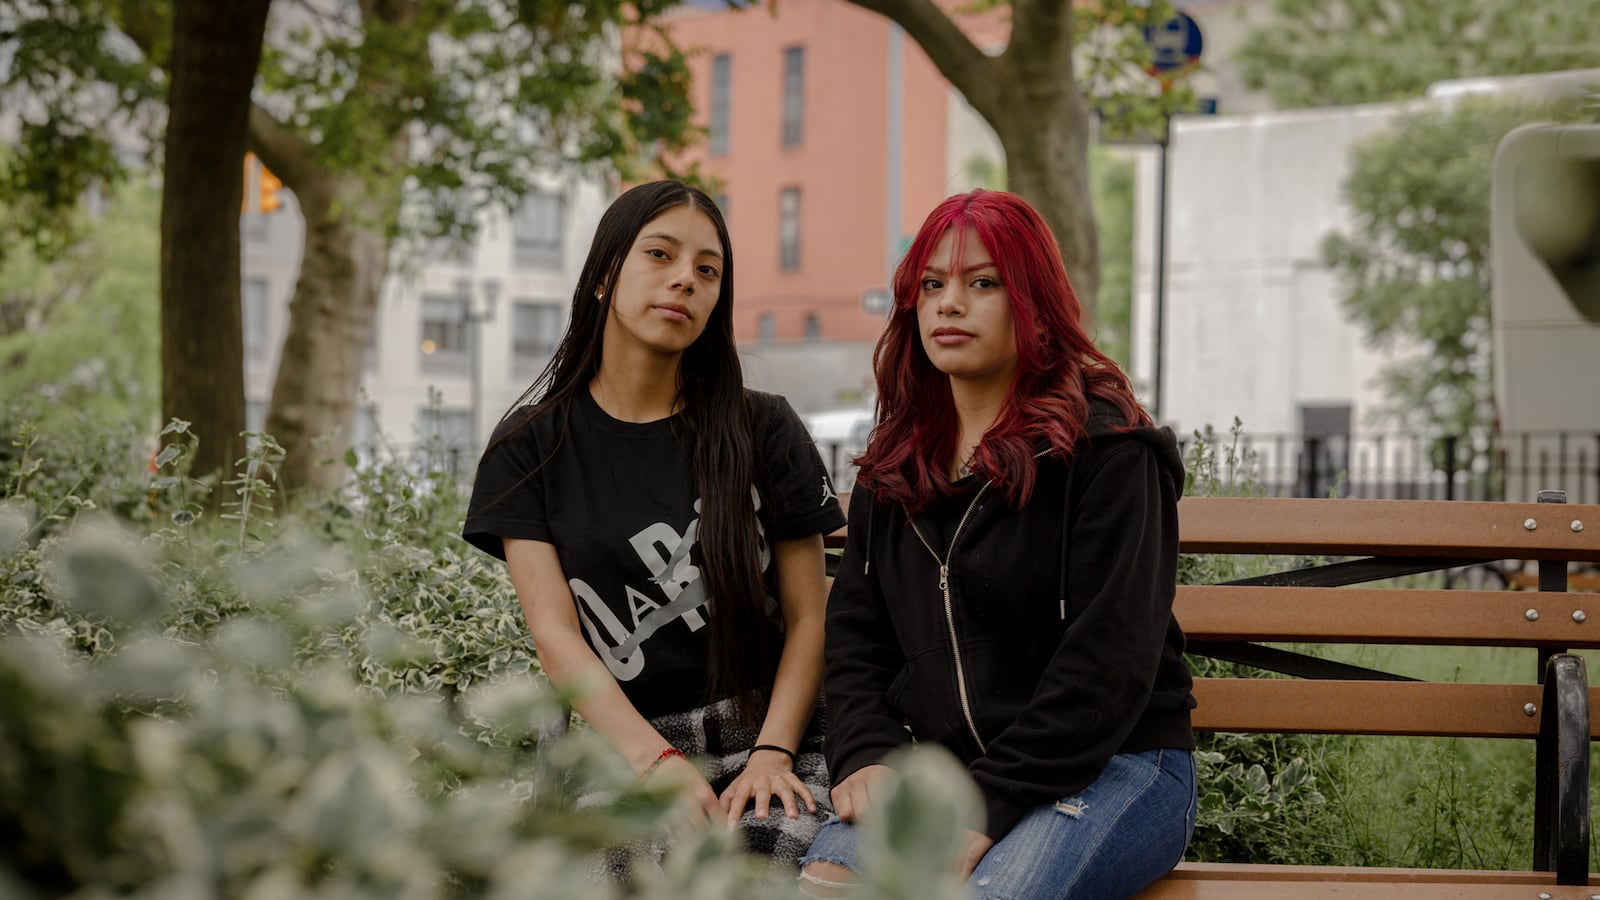 Two high school students and sisters, one with long dark hair and one with short red hair sit next to each other on a park bench with green trees and bushes around then.